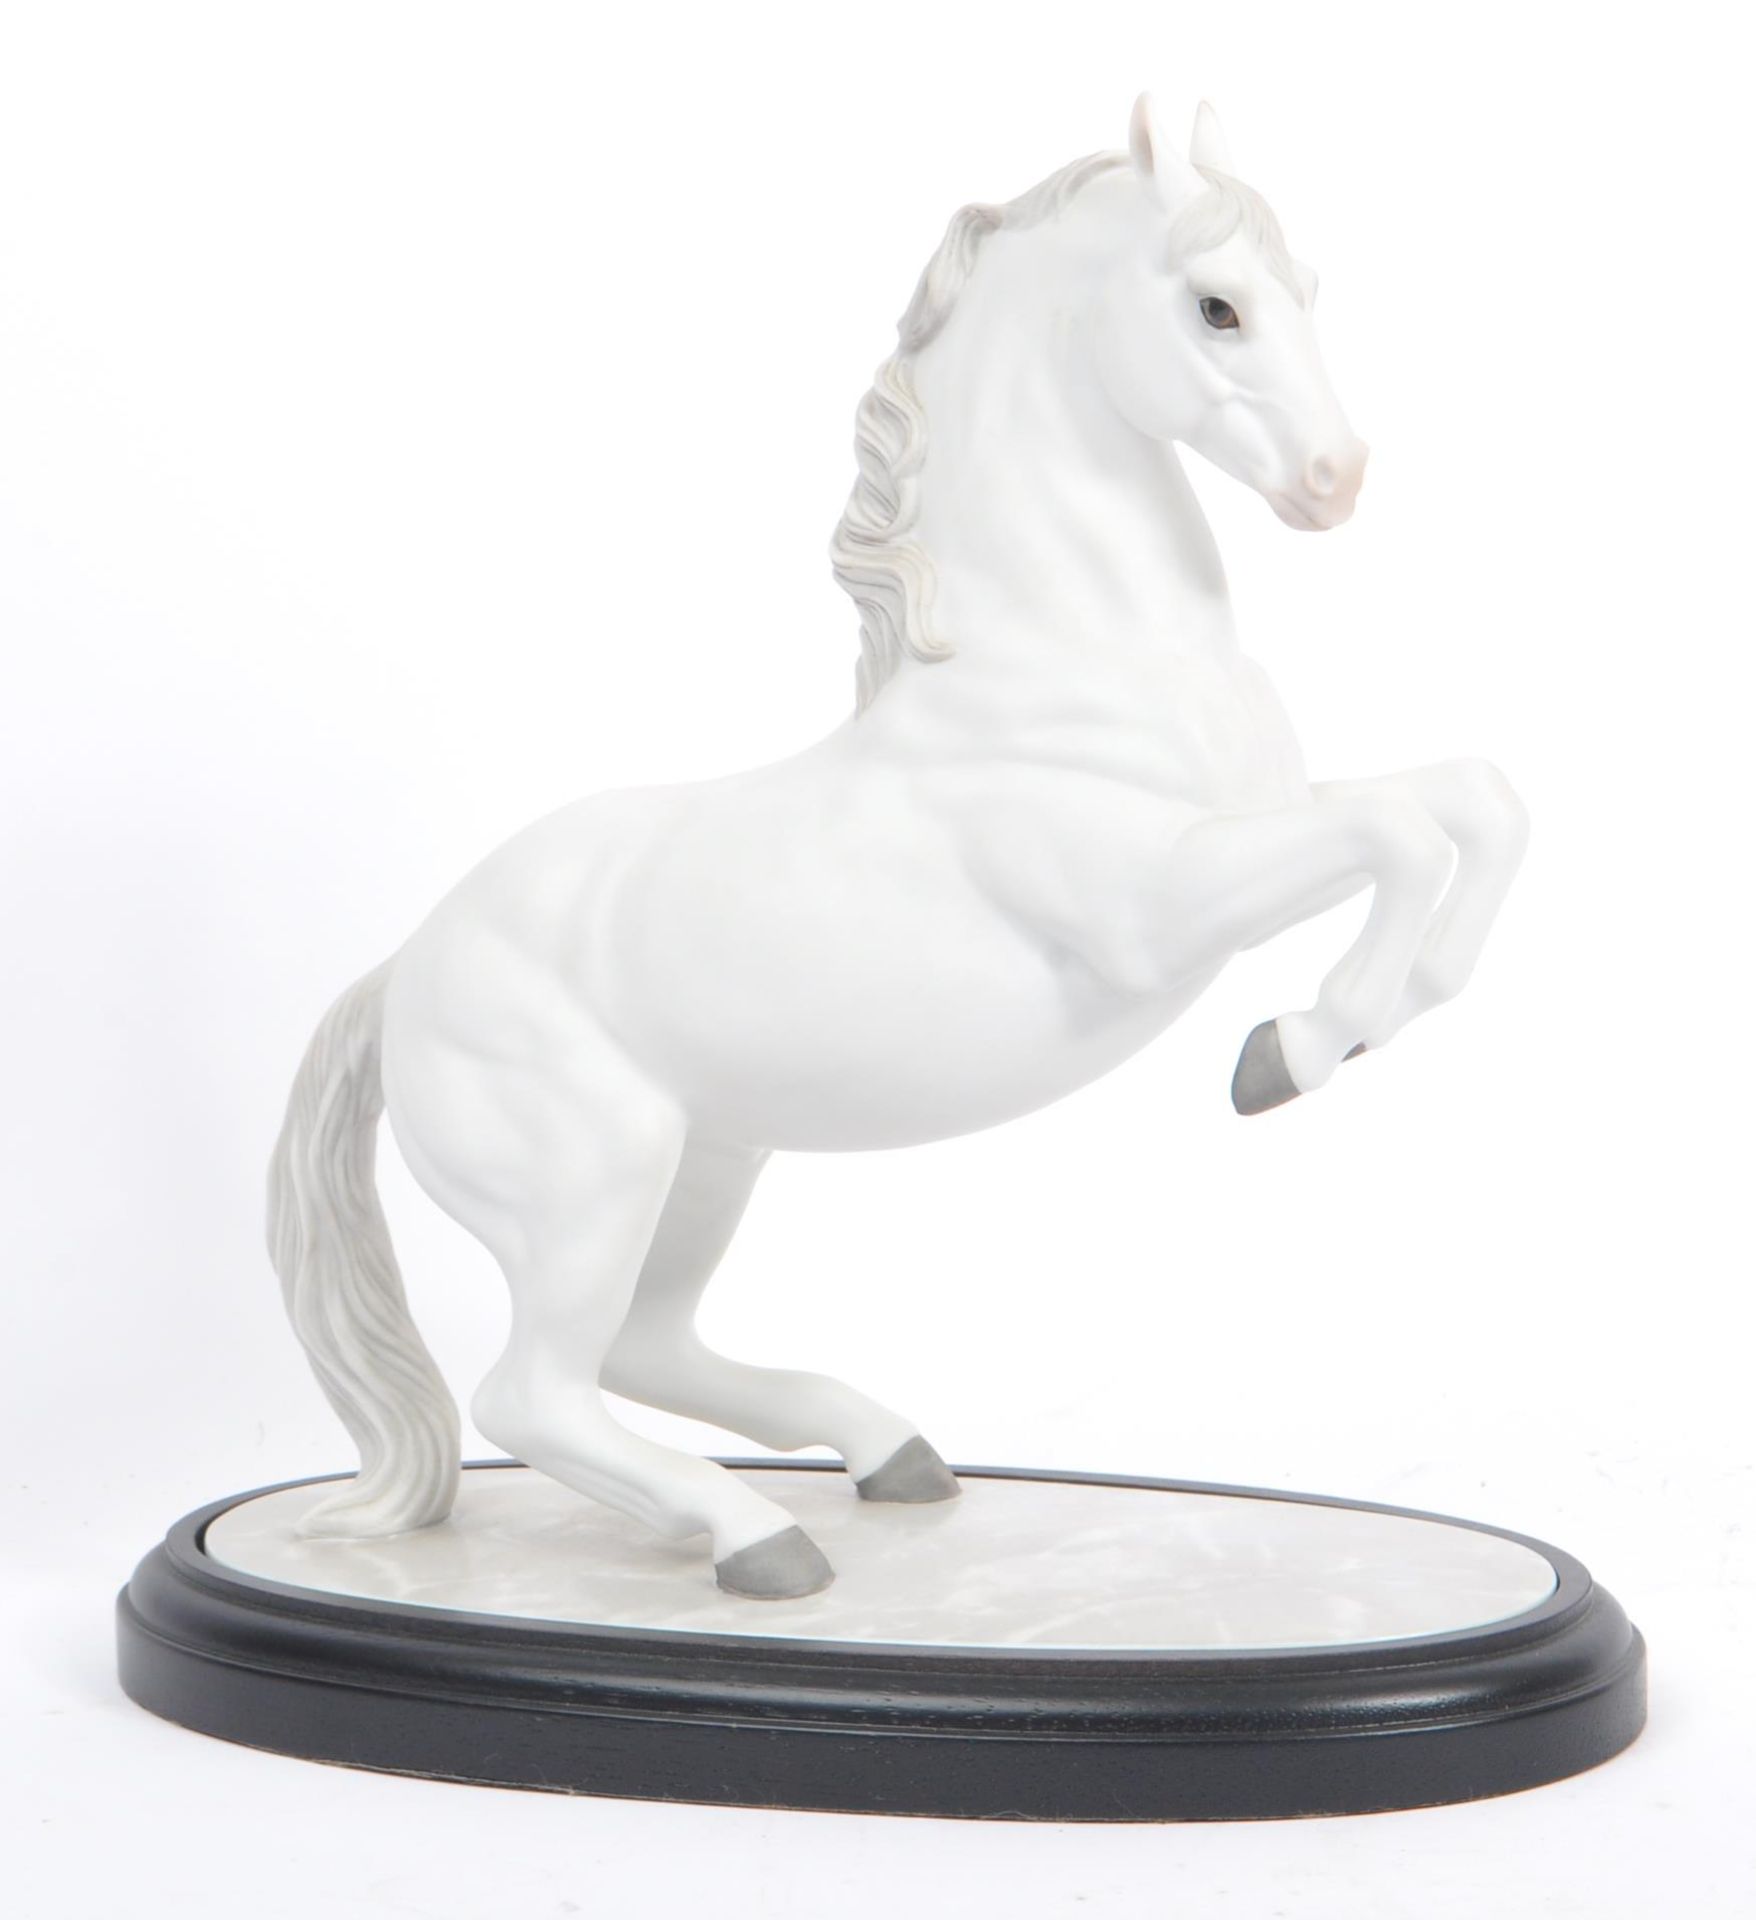 COLLECTION OF CONTEMPORARY PORCELAIN HORSE FIGURINES - Image 6 of 8